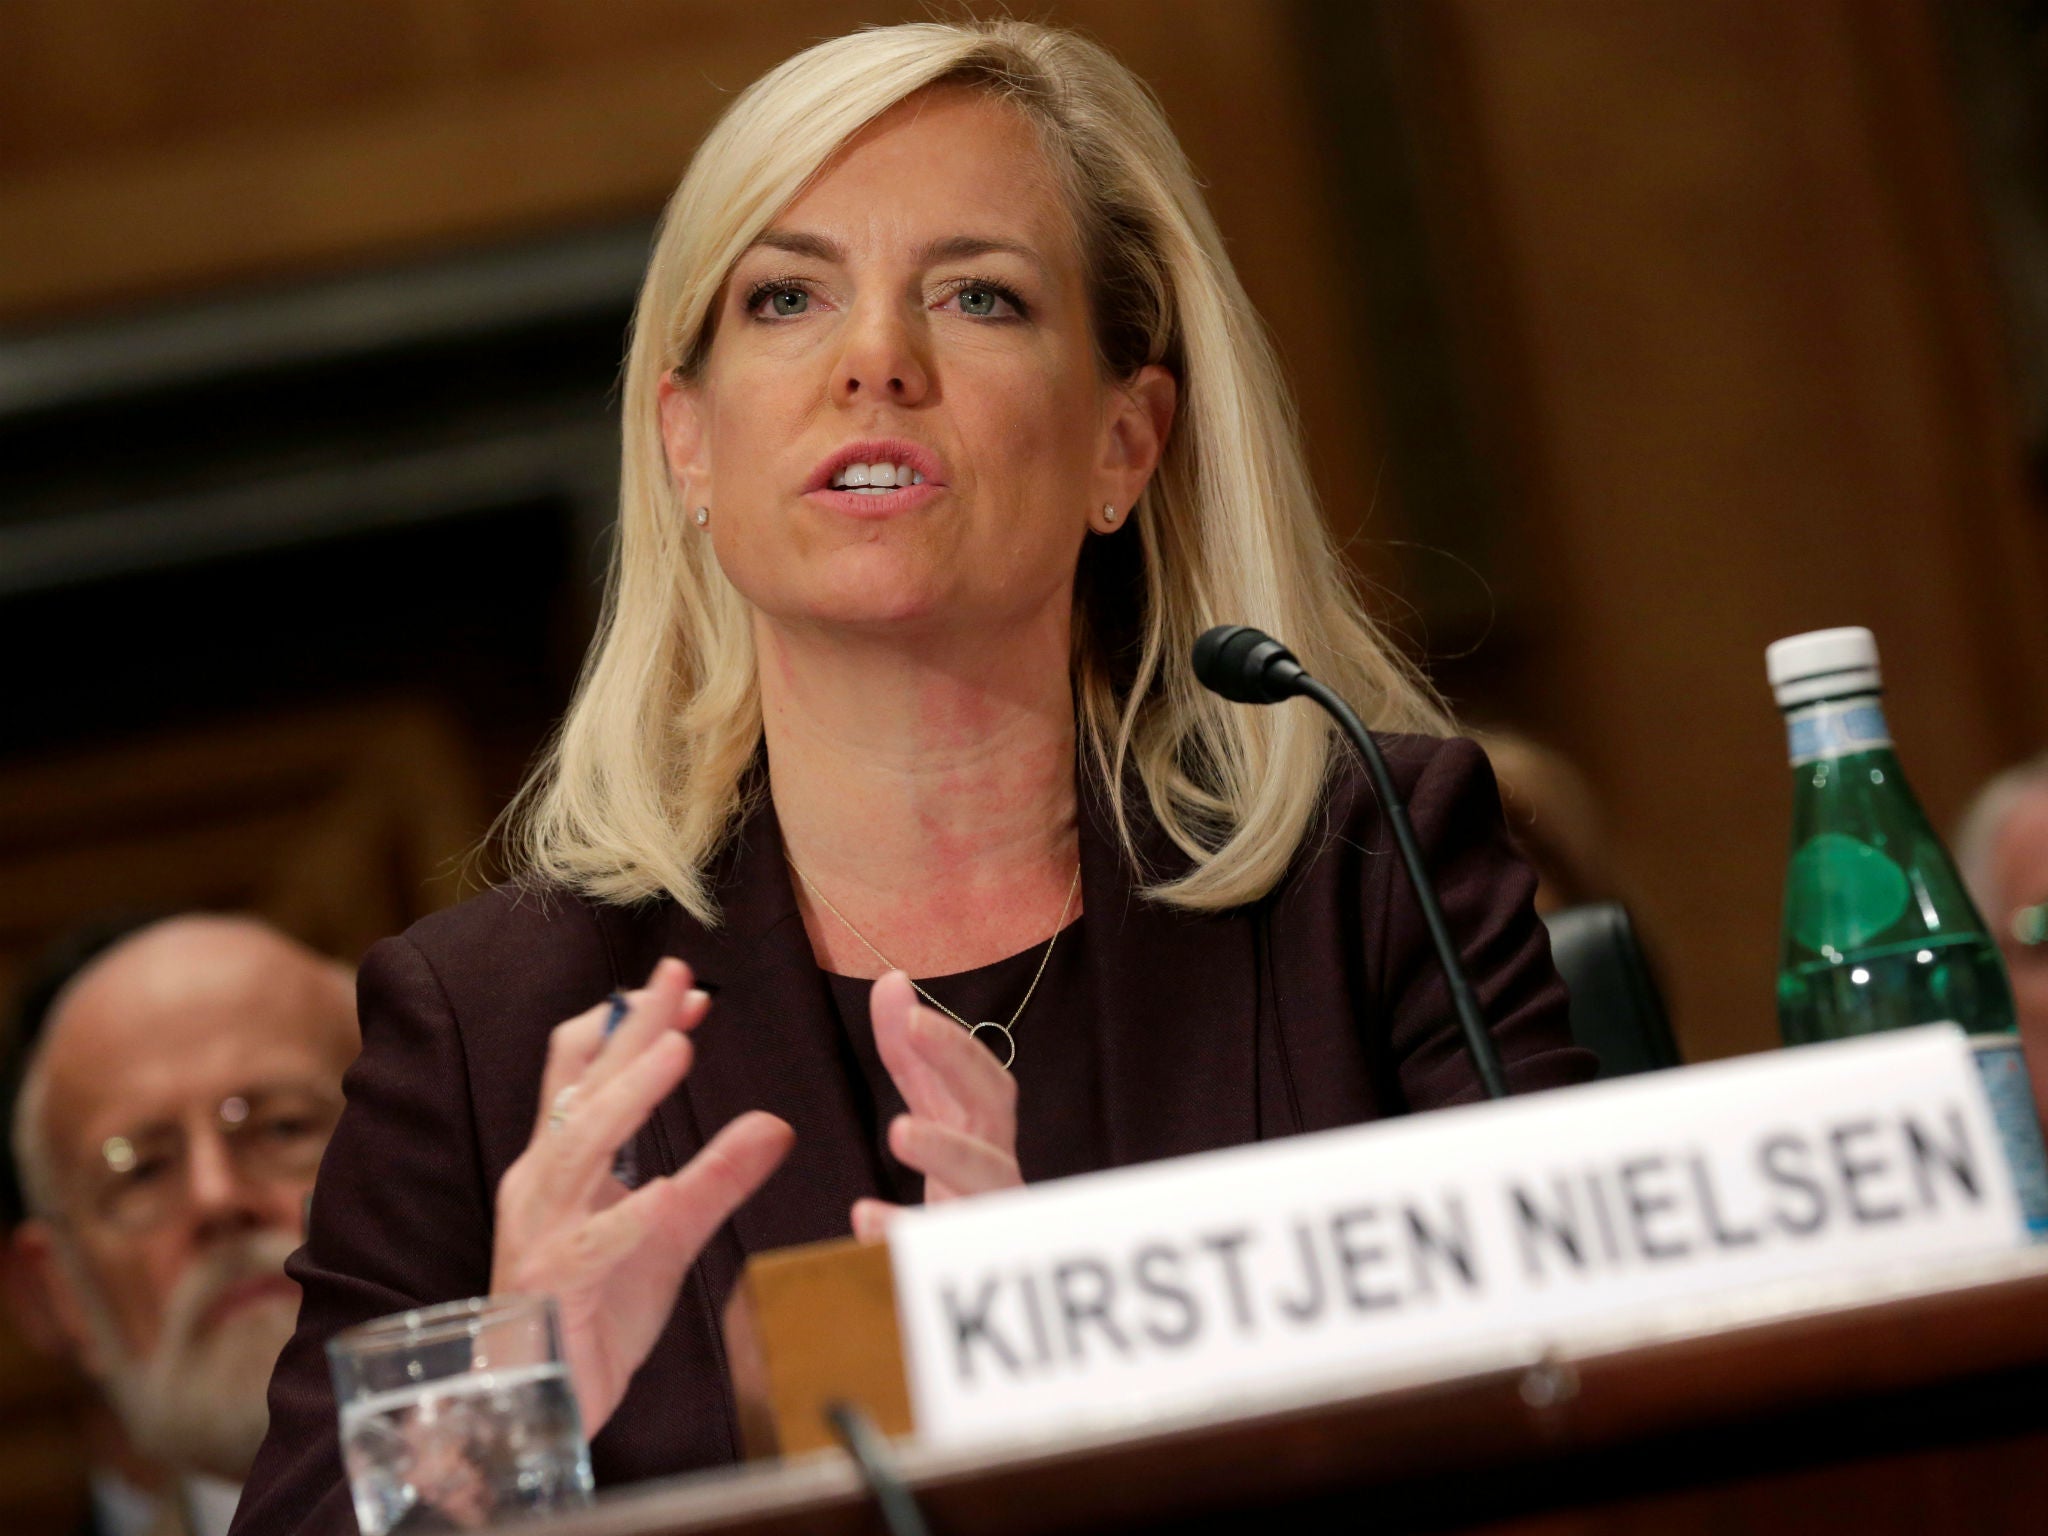 Kirstjen Nielsen testifies to the Senate Homeland Security and Governmental Affairs Committee on her nomination to be secretary of the Department of Homeland Security on November 8, 2017